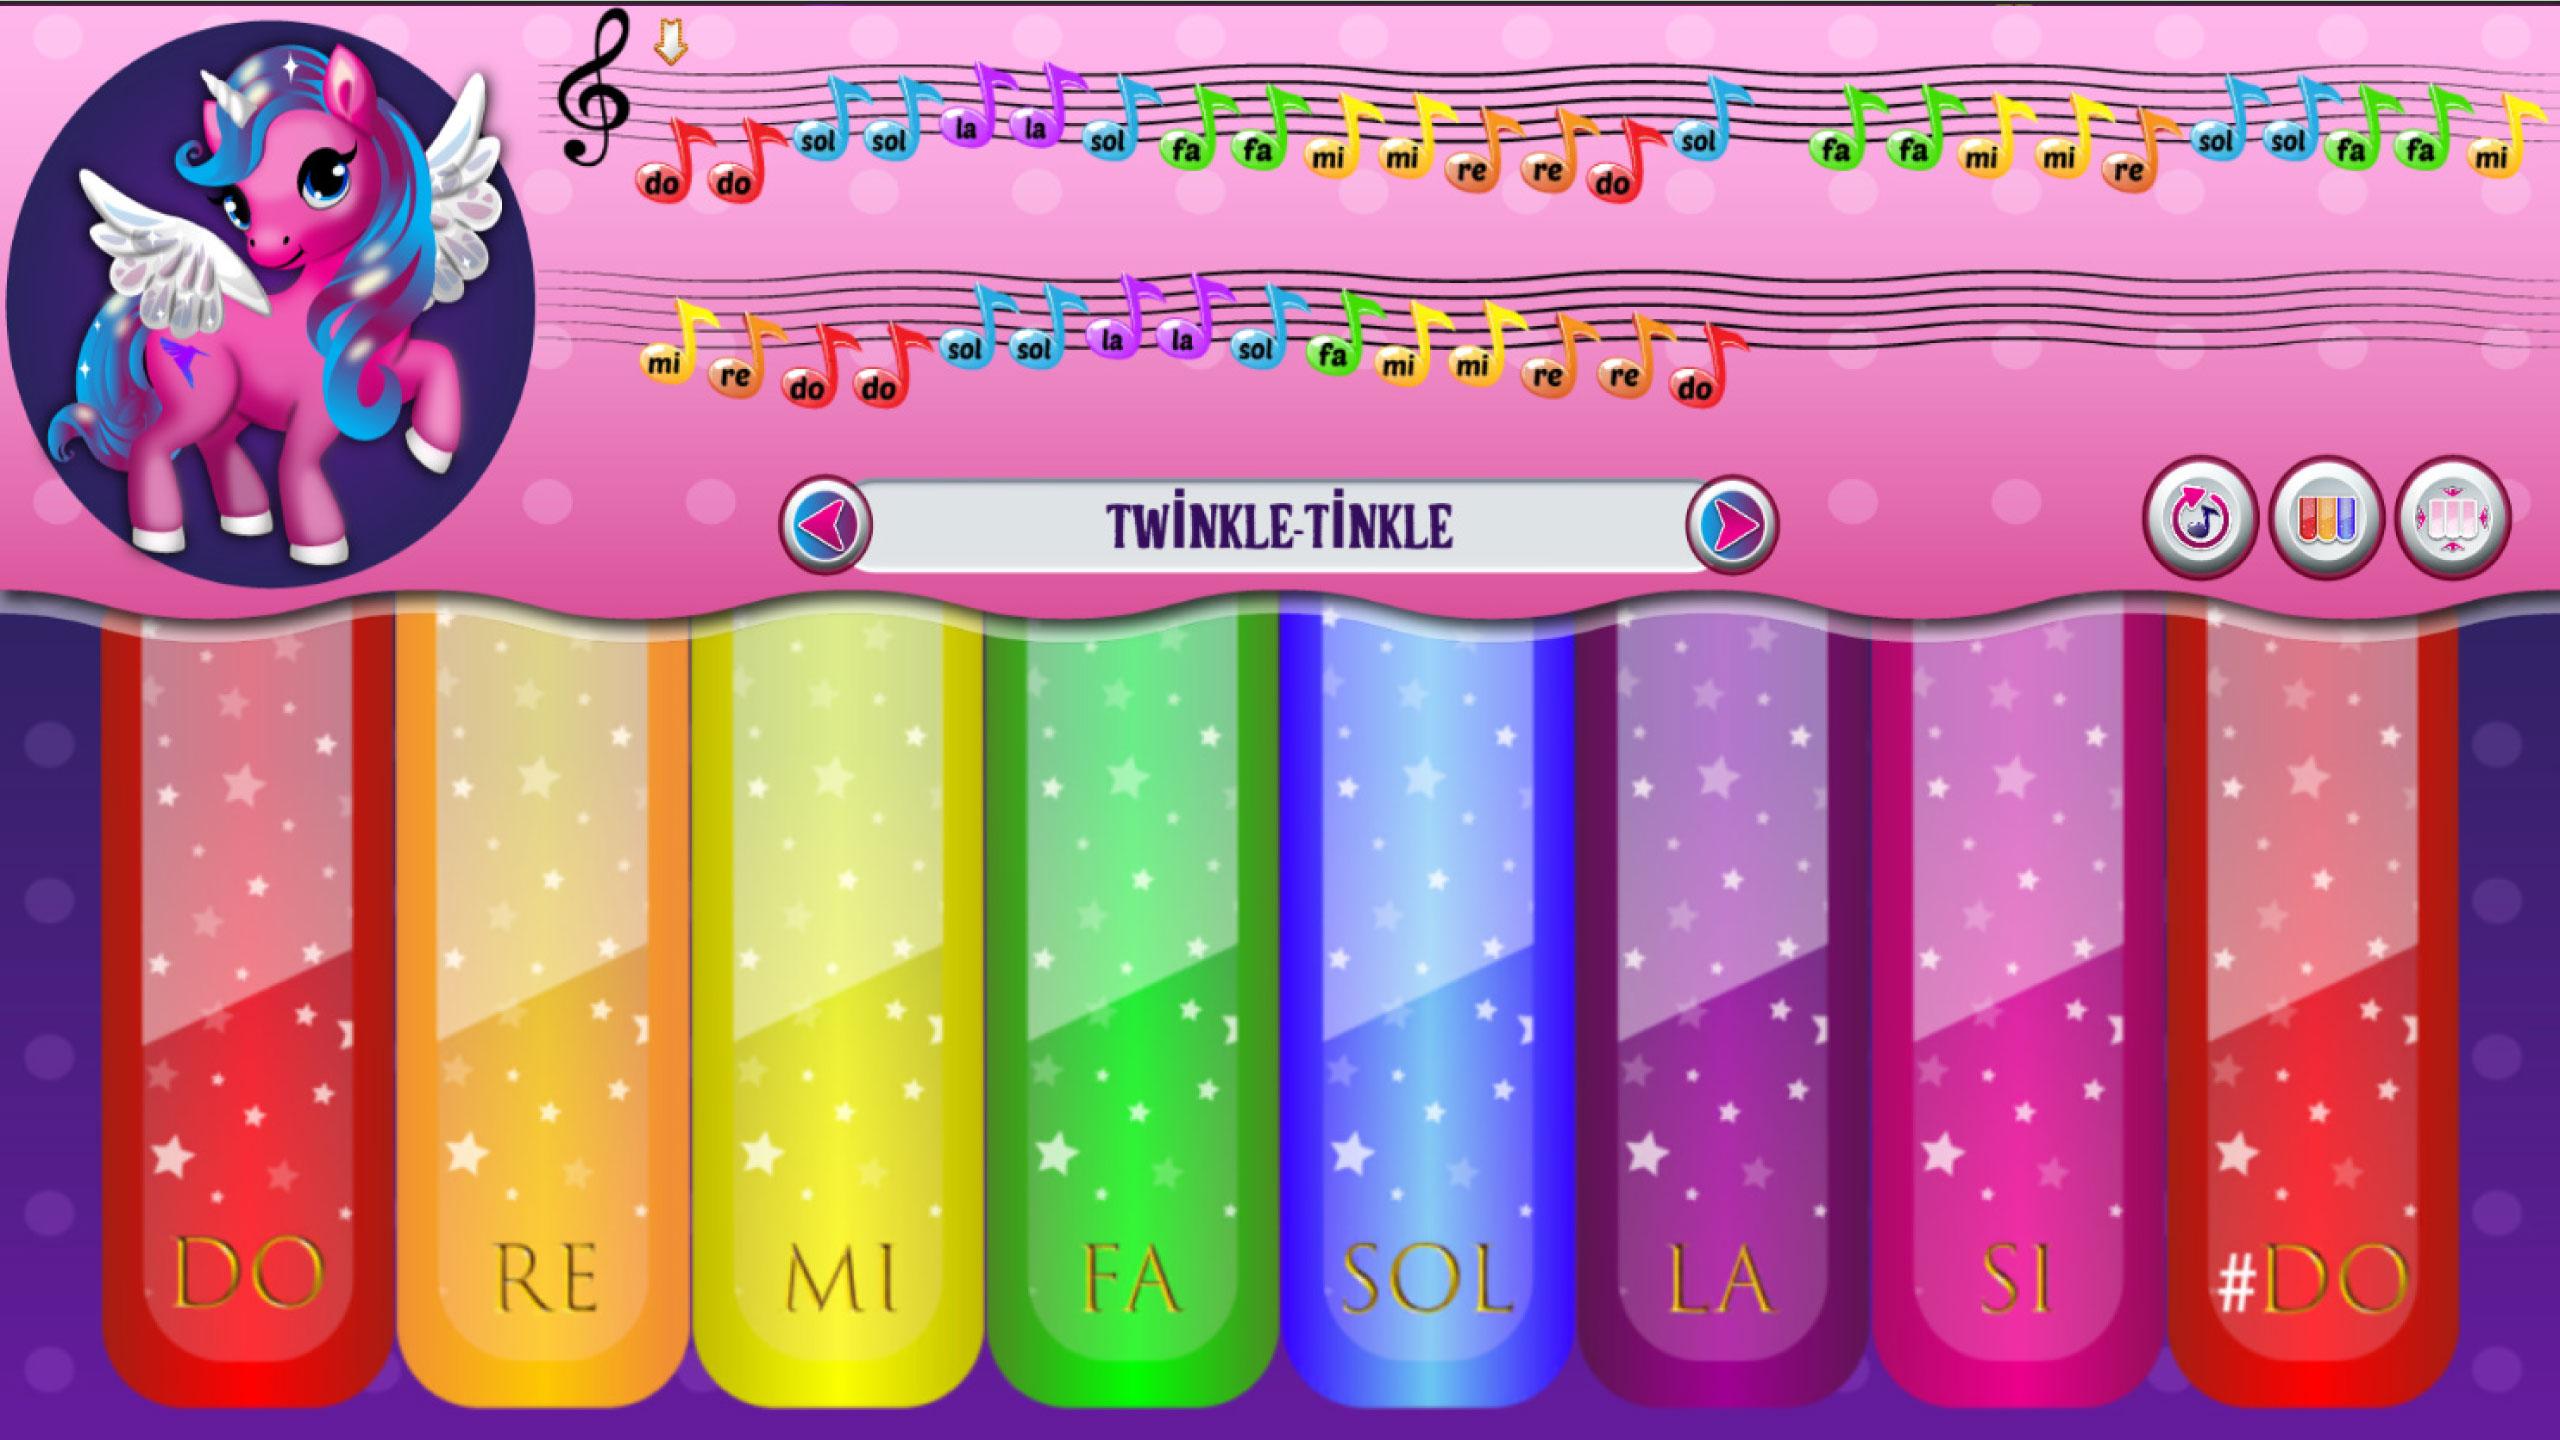 My Colorful Litle Pony Instrument - Piano 2.0 Screenshot 4